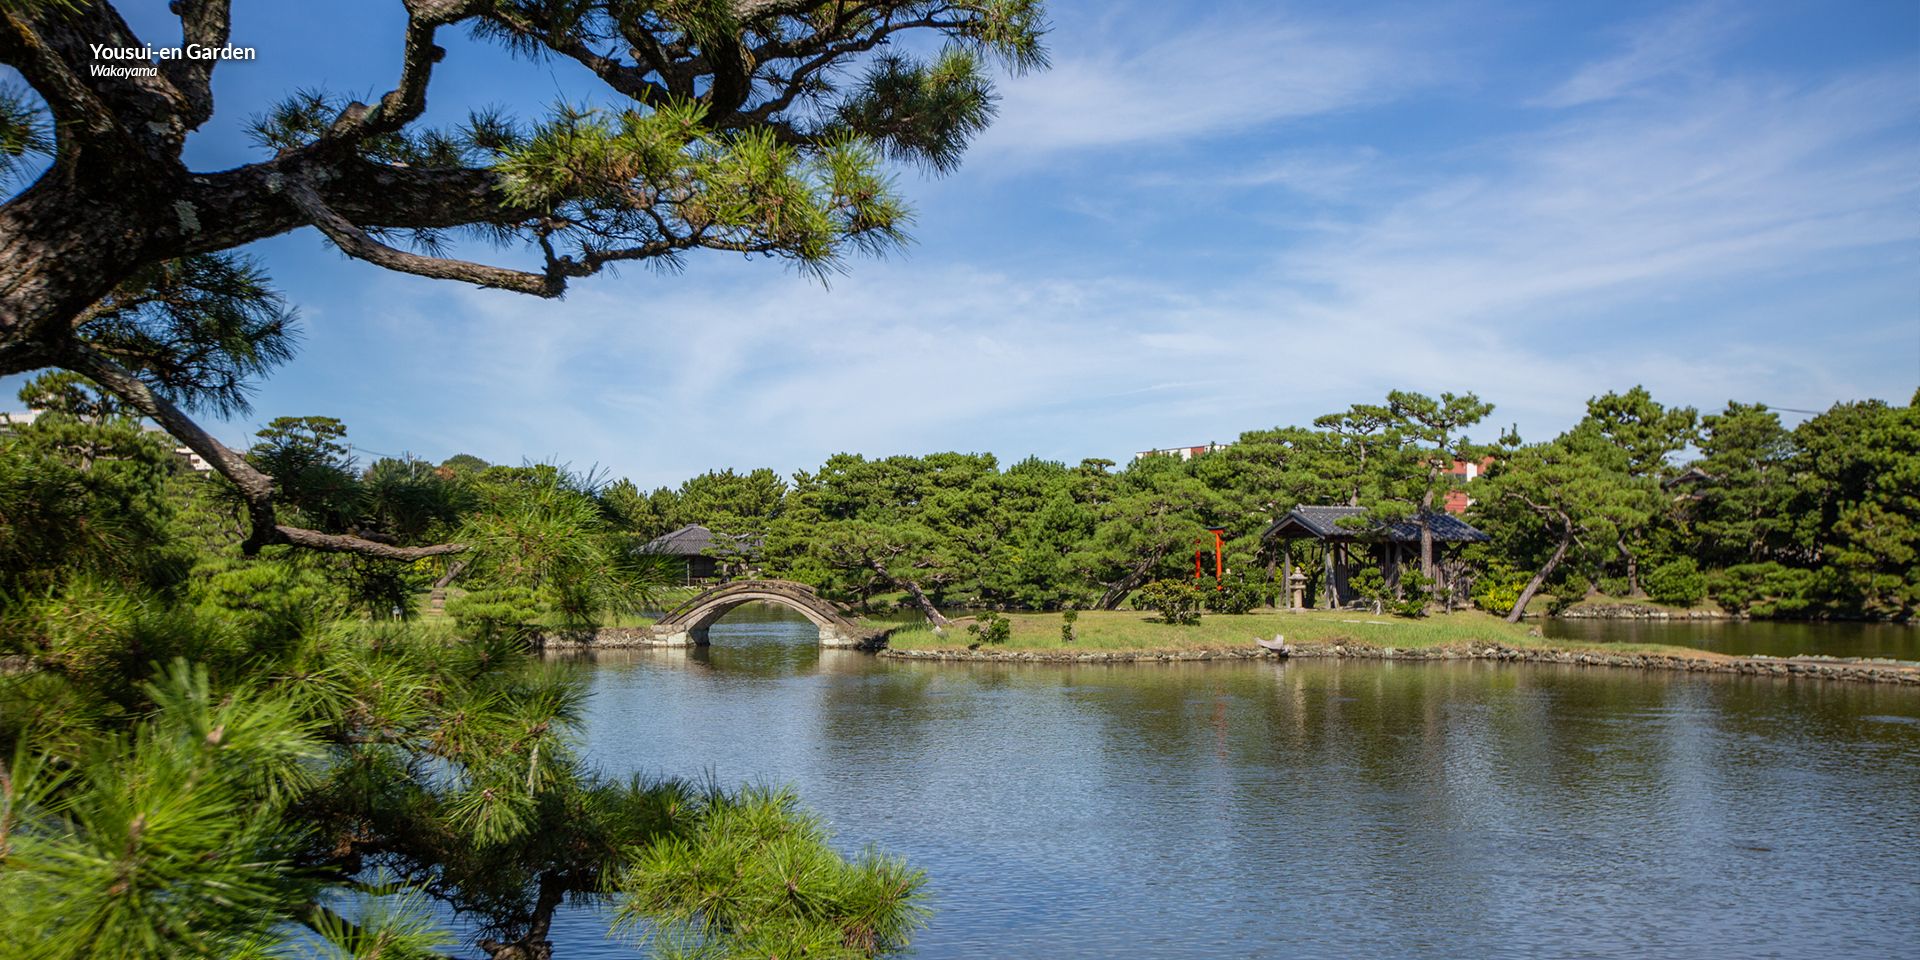 48 hours in Tokyo: Our express guide to the Japanese capital